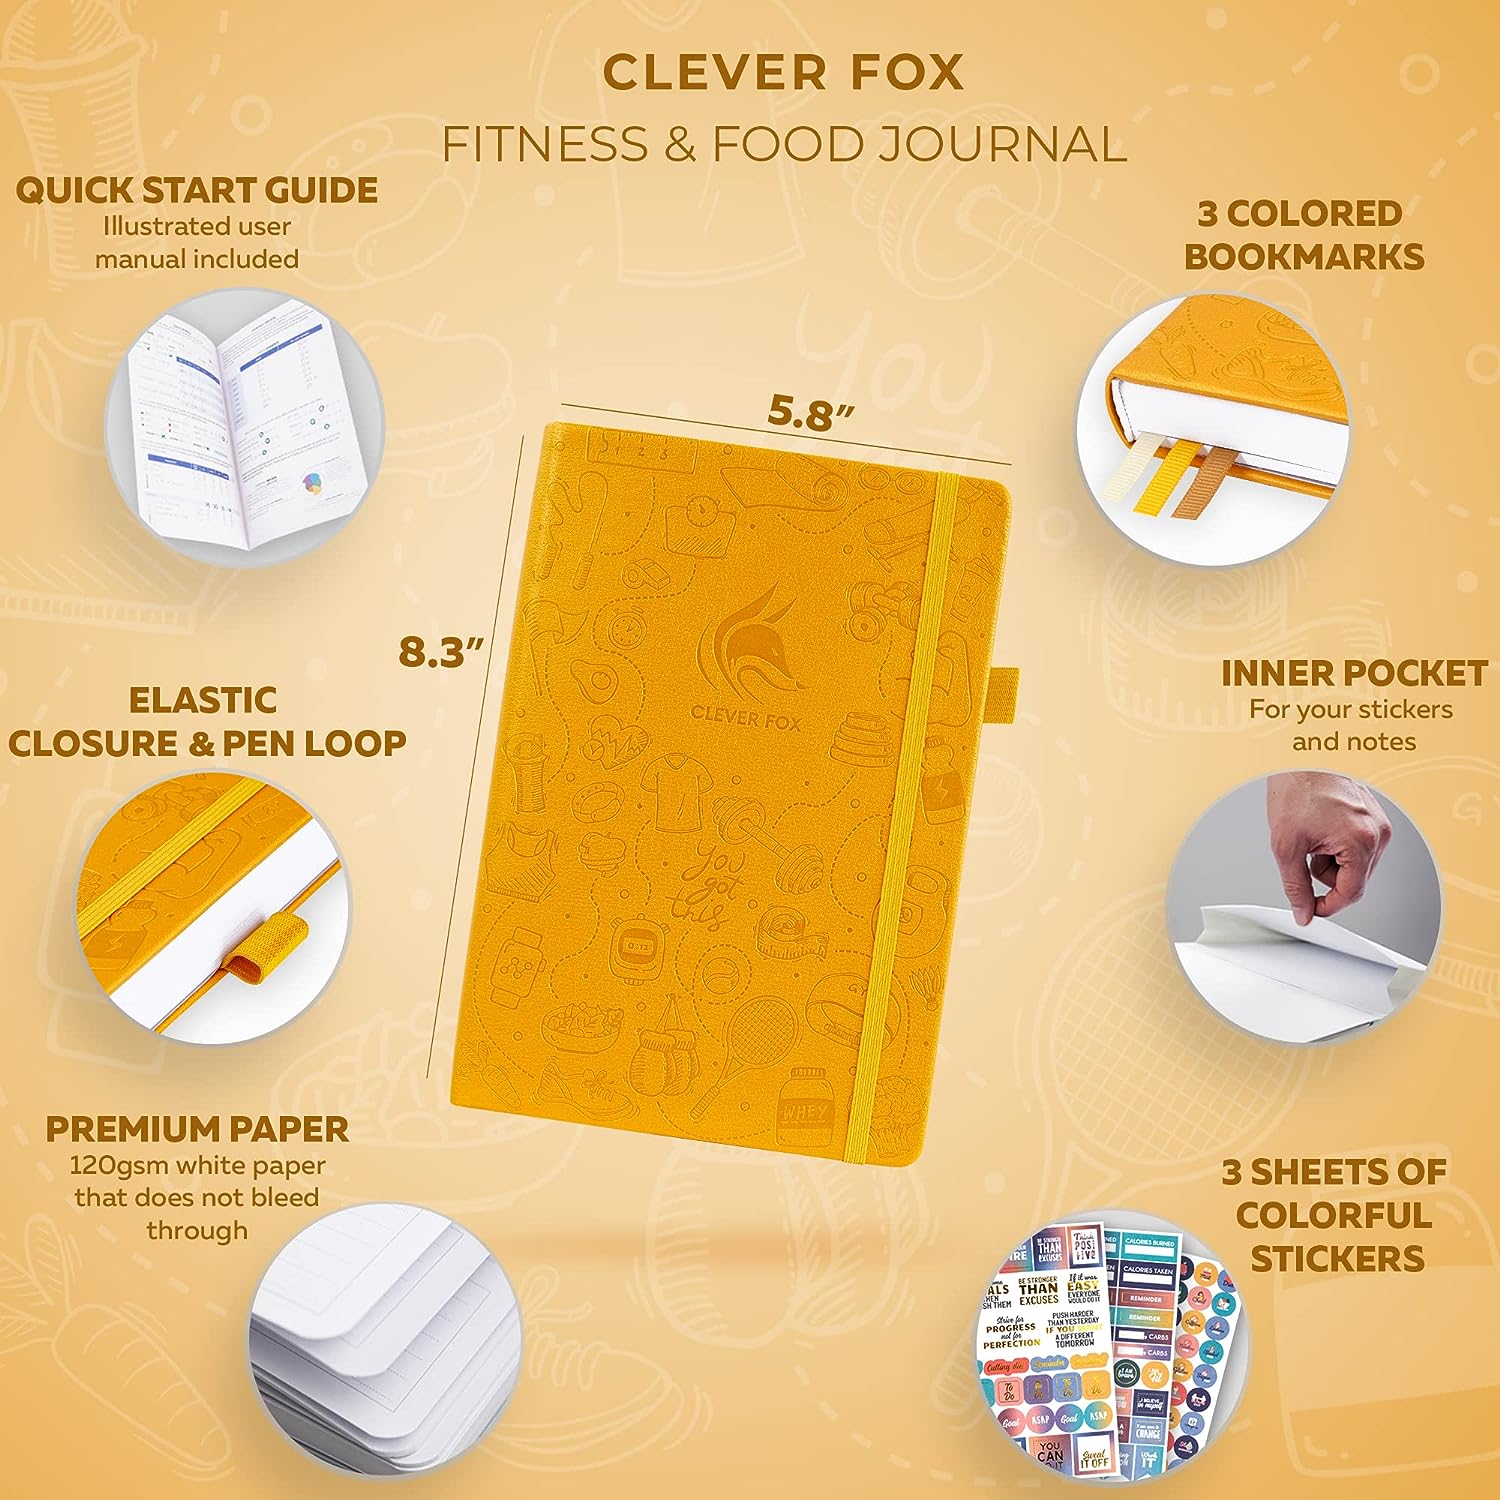 Clever Fox Fitness  Food Journal – Nutrition  Workout Planner for Women  Men – Diet  Gym Exercise Log Book with Calendars, Diet  Training Trackers - Undated, A5, Hardcover (Amber Yellow)